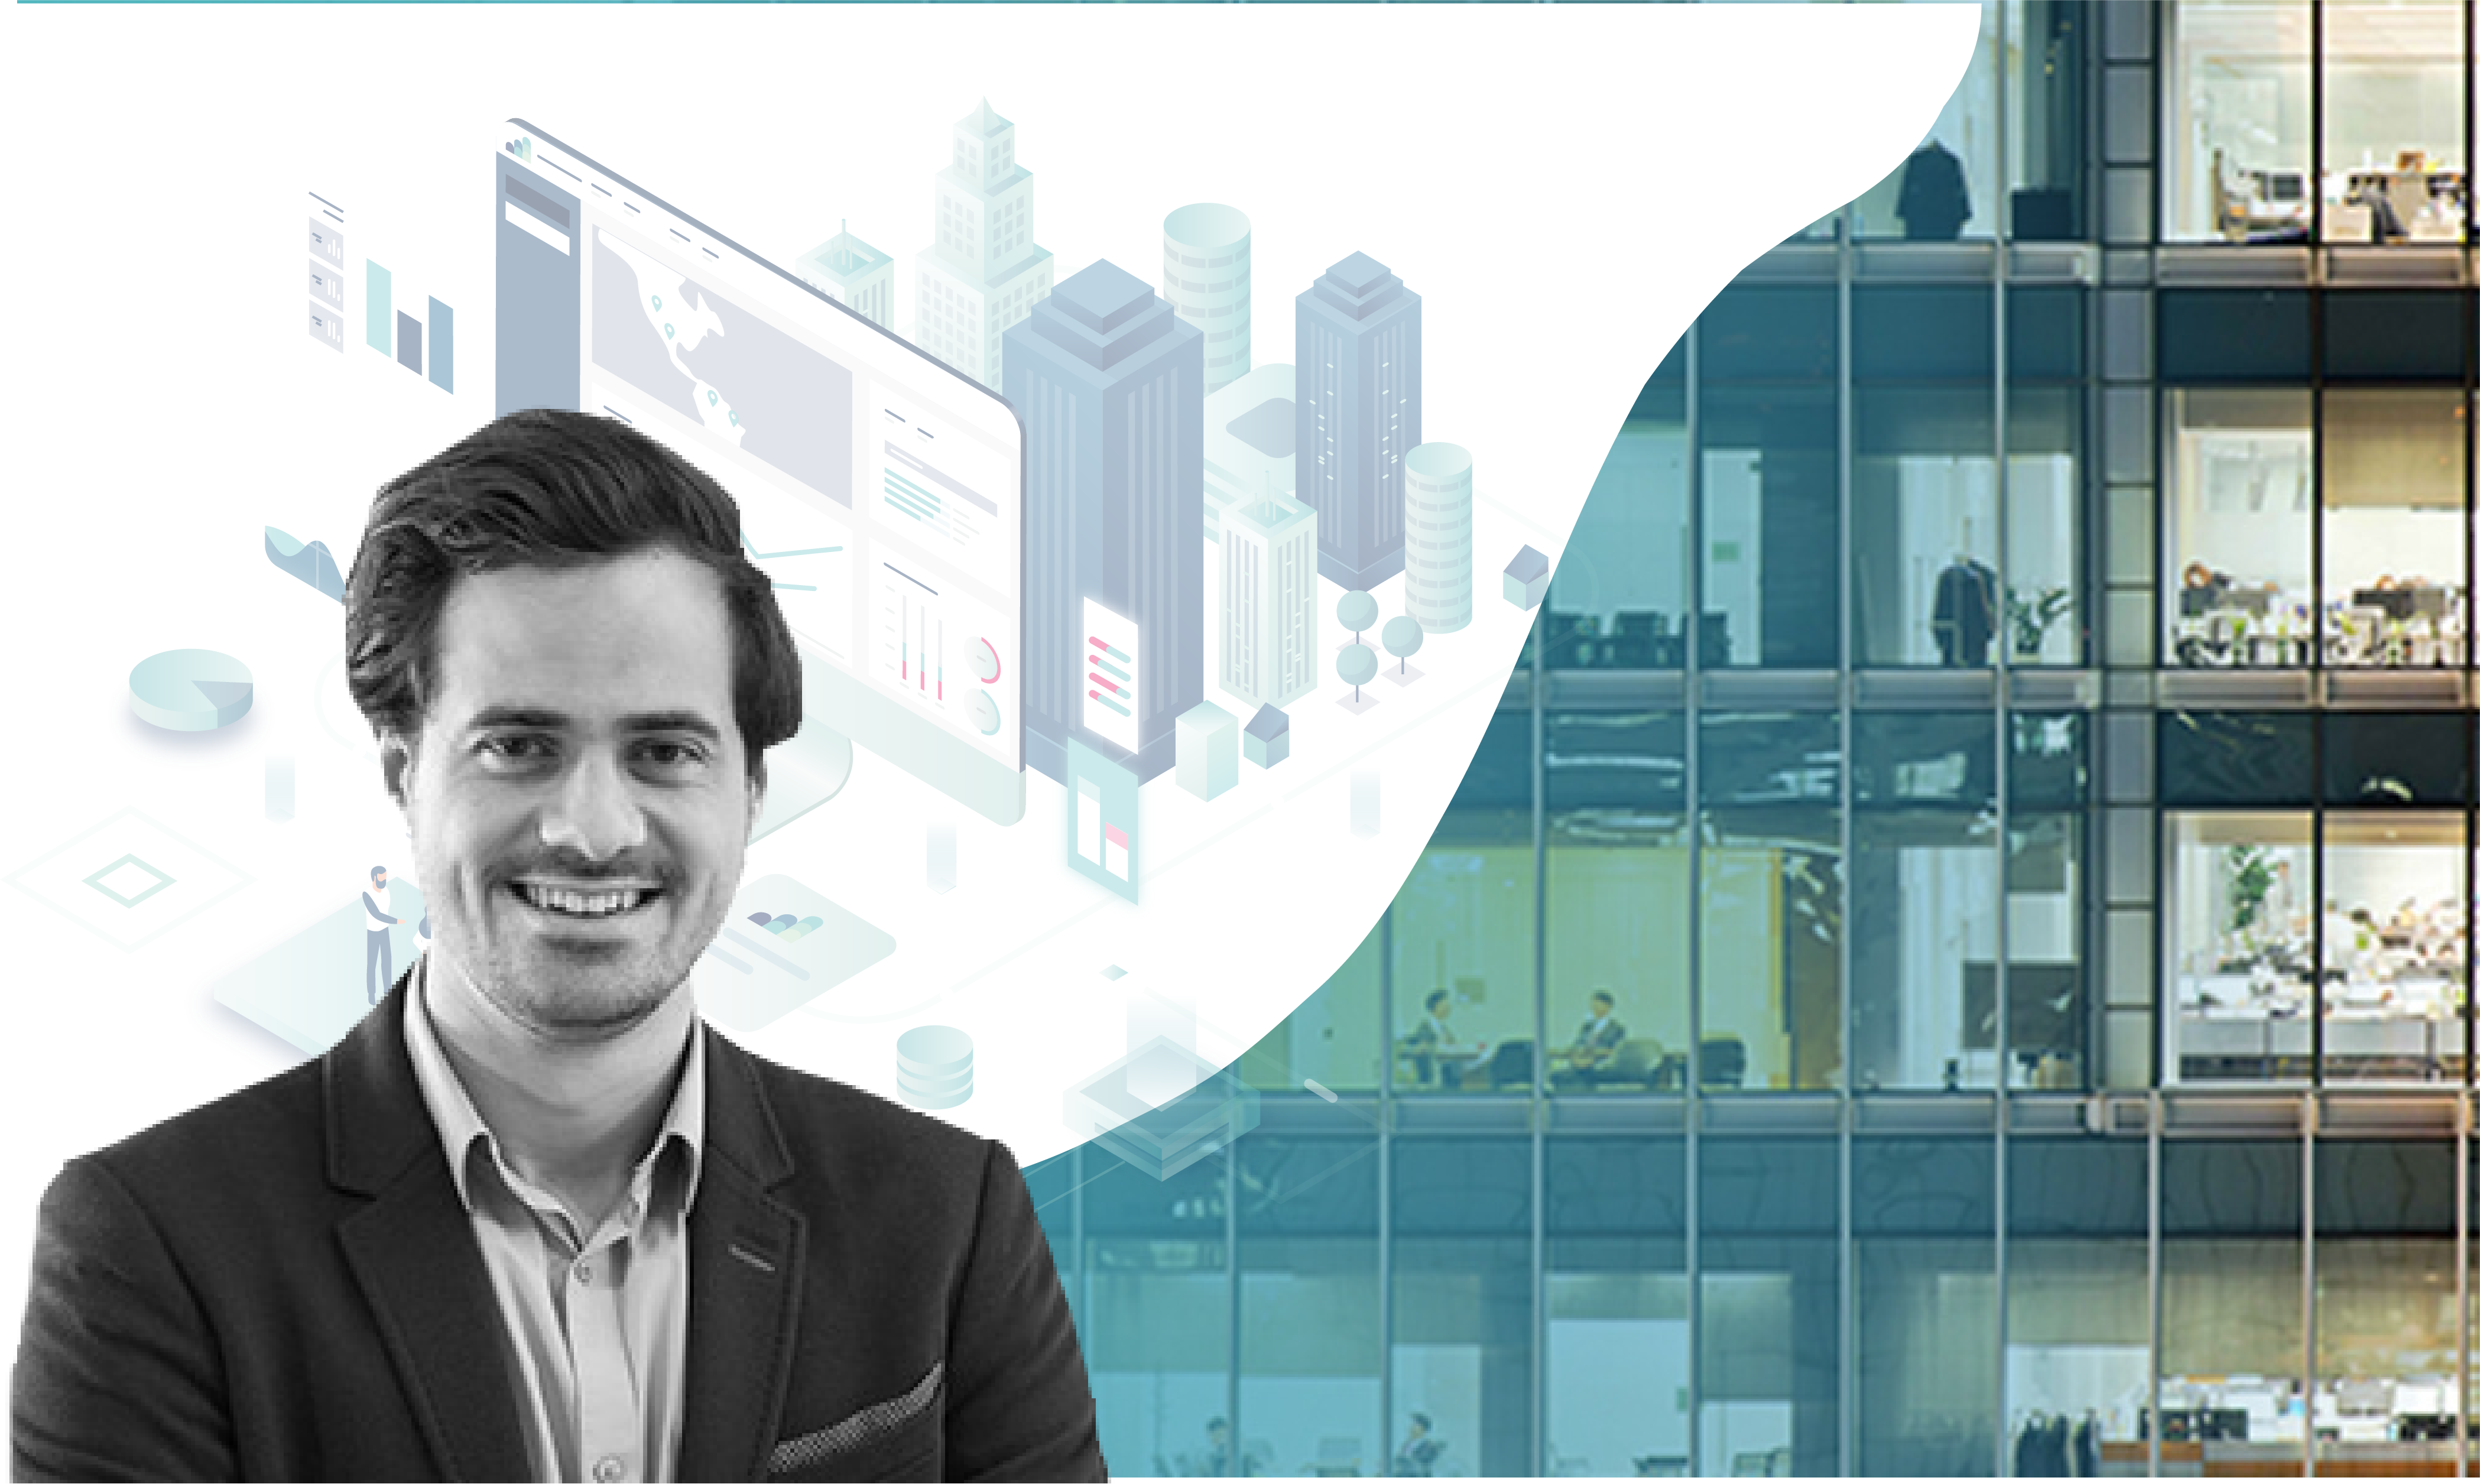 Discover how Locatee is Providing Corporate Real Estate Managers Flexibility, Safety, and Greater Visibility into Building Occupancy